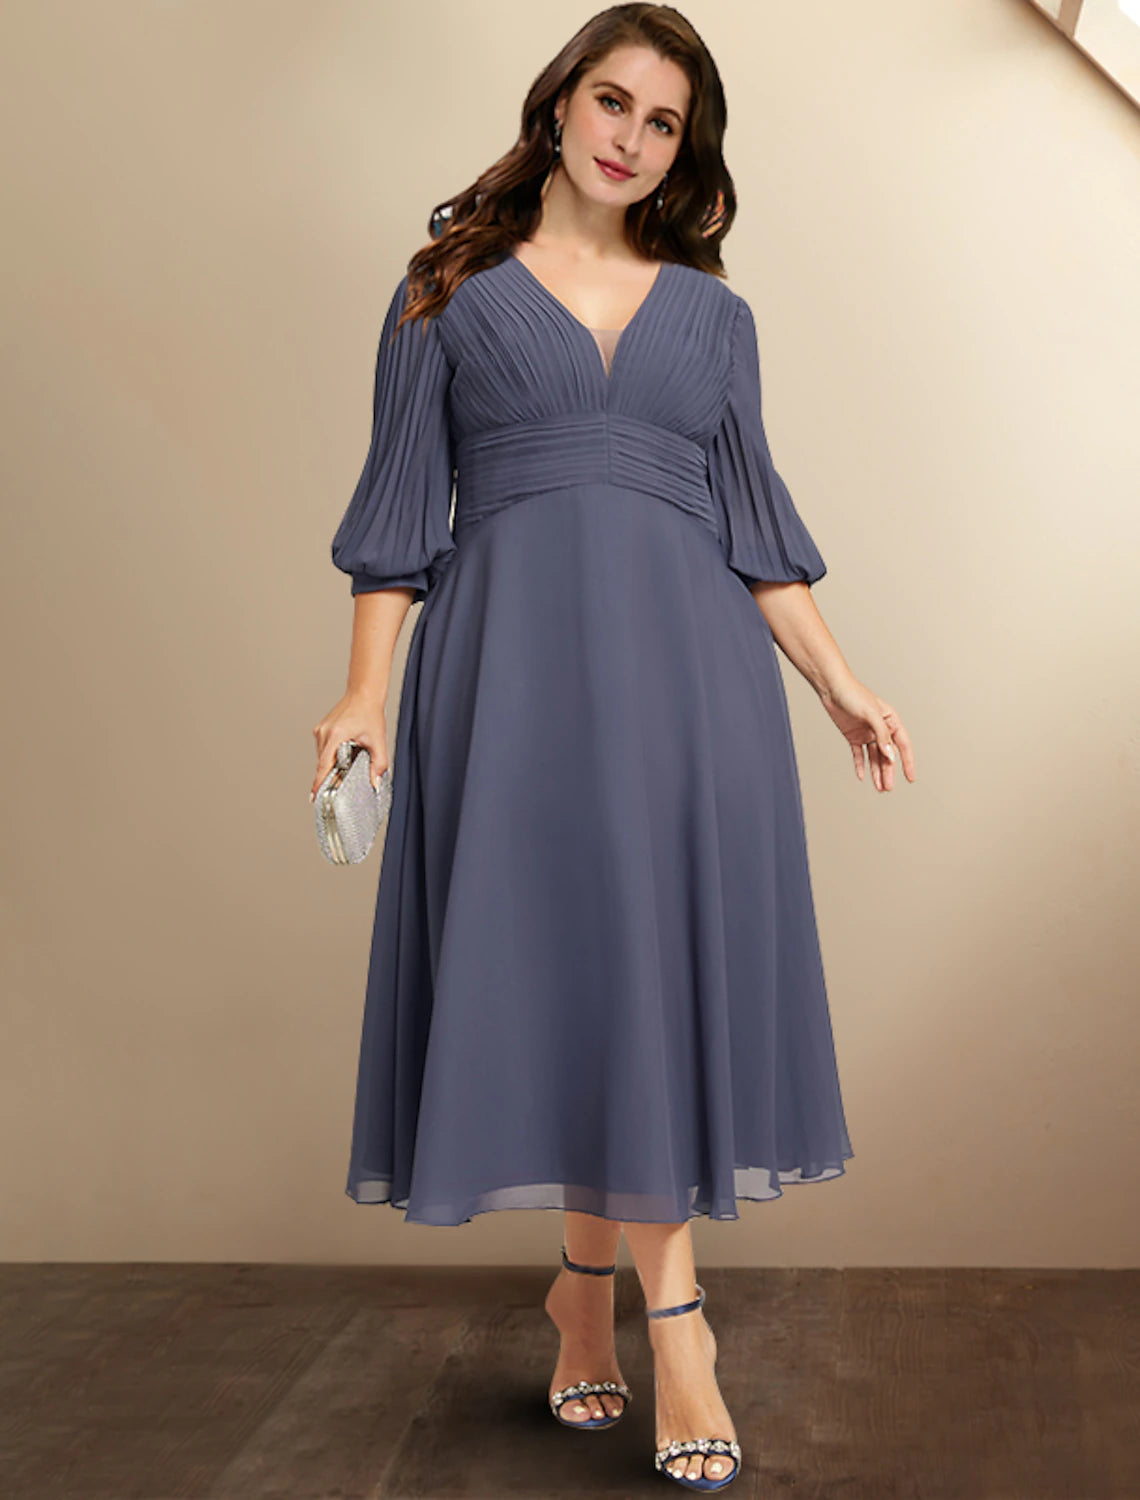 A-Line Mother of the Bride Dresses Plus Size Hide Belly Curve Elegant Dress Formal Tea Length Half Sleeve V Neck Chiffon with Pleats Ruched Fall